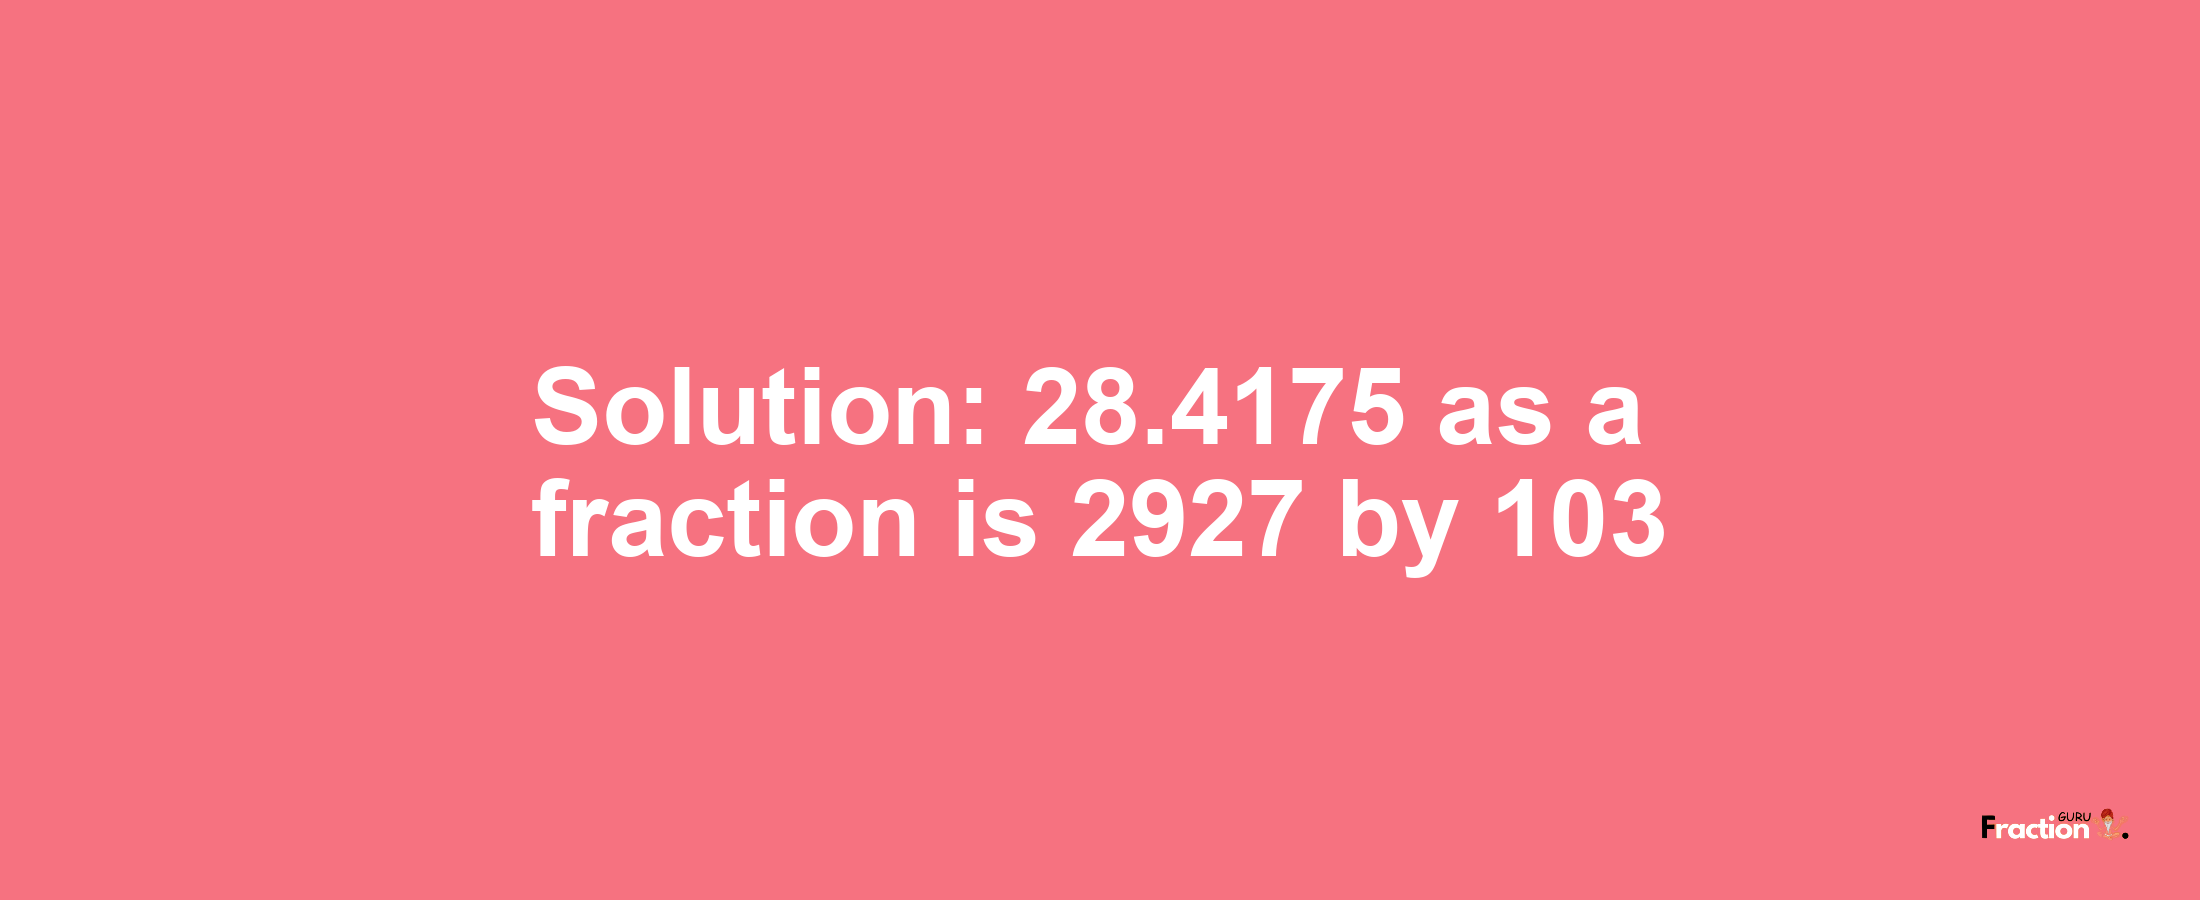 Solution:28.4175 as a fraction is 2927/103